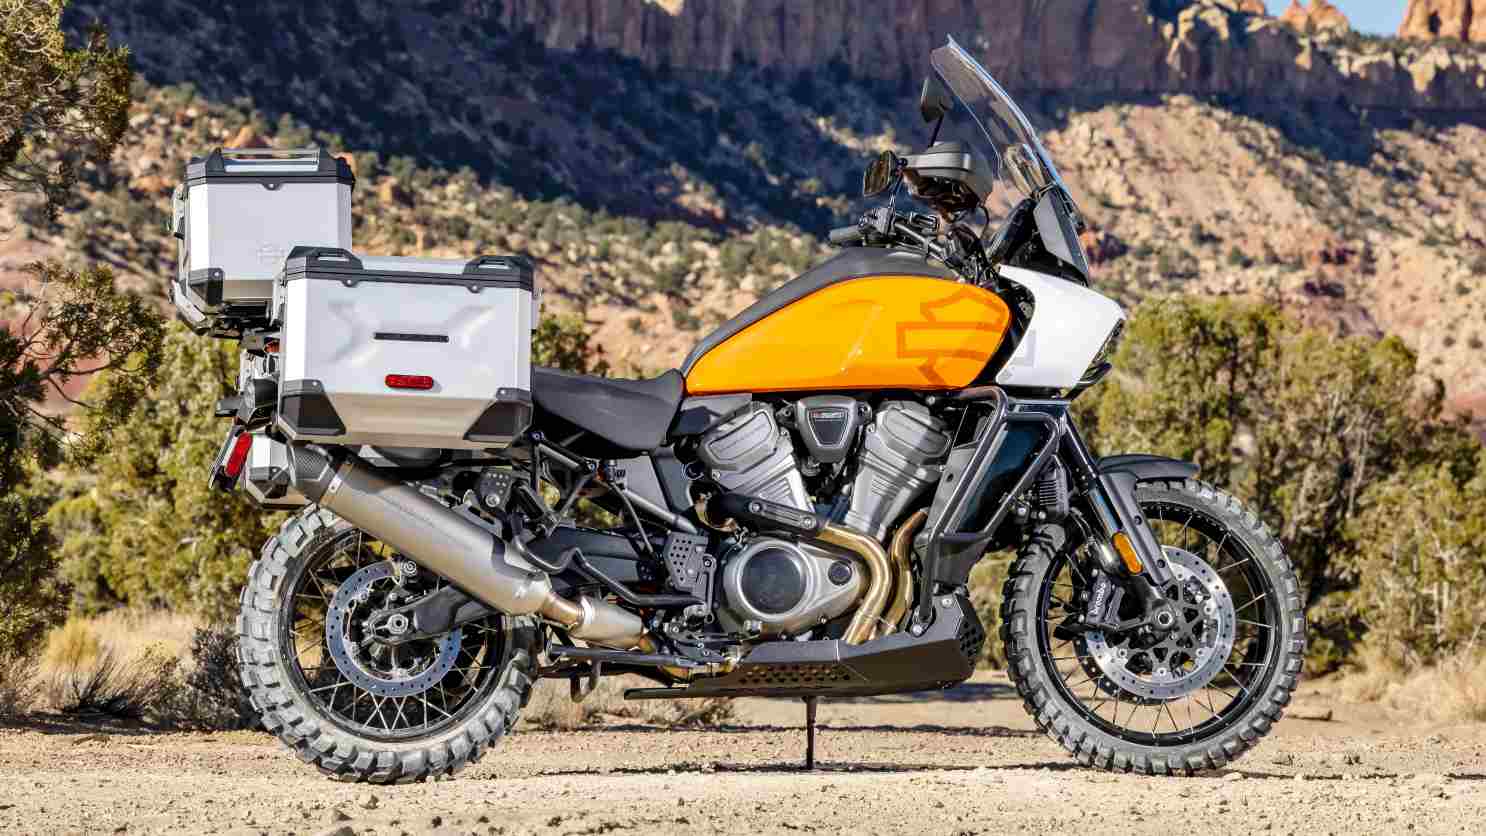 Harley Davidson Pan America 1250 Launched At Rs 16 90 Lakh More Harleys Reintroduced Technology News Fp Digitalsevaa Com Follow Us For Latest Digital Marketing Trends Tips Products And More